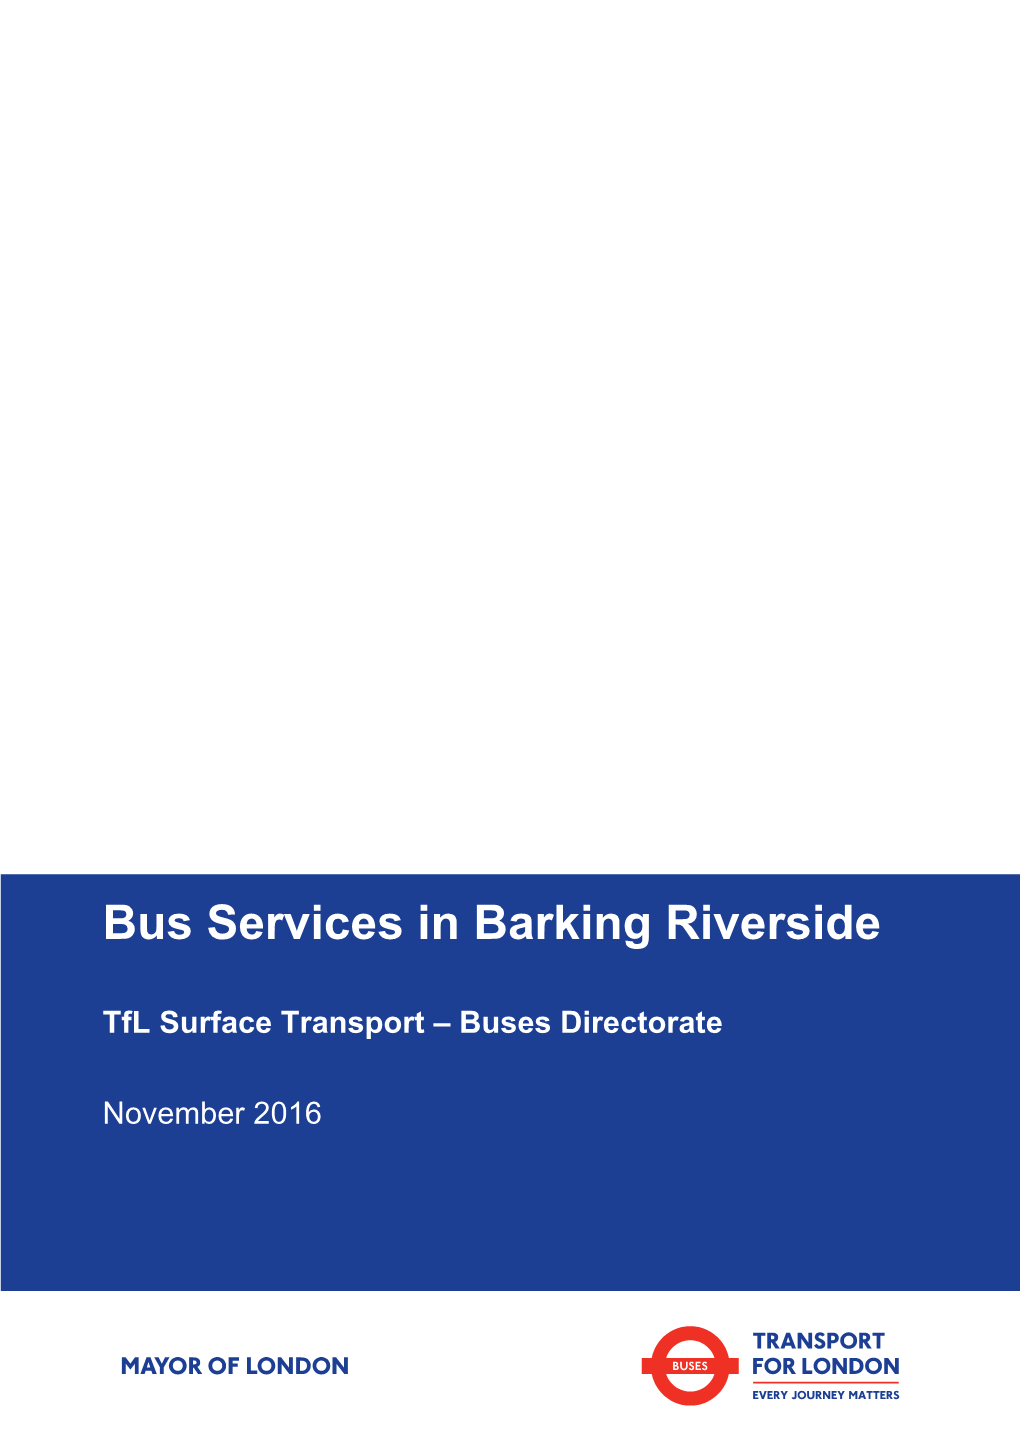 Bus Services in Barking Riverside